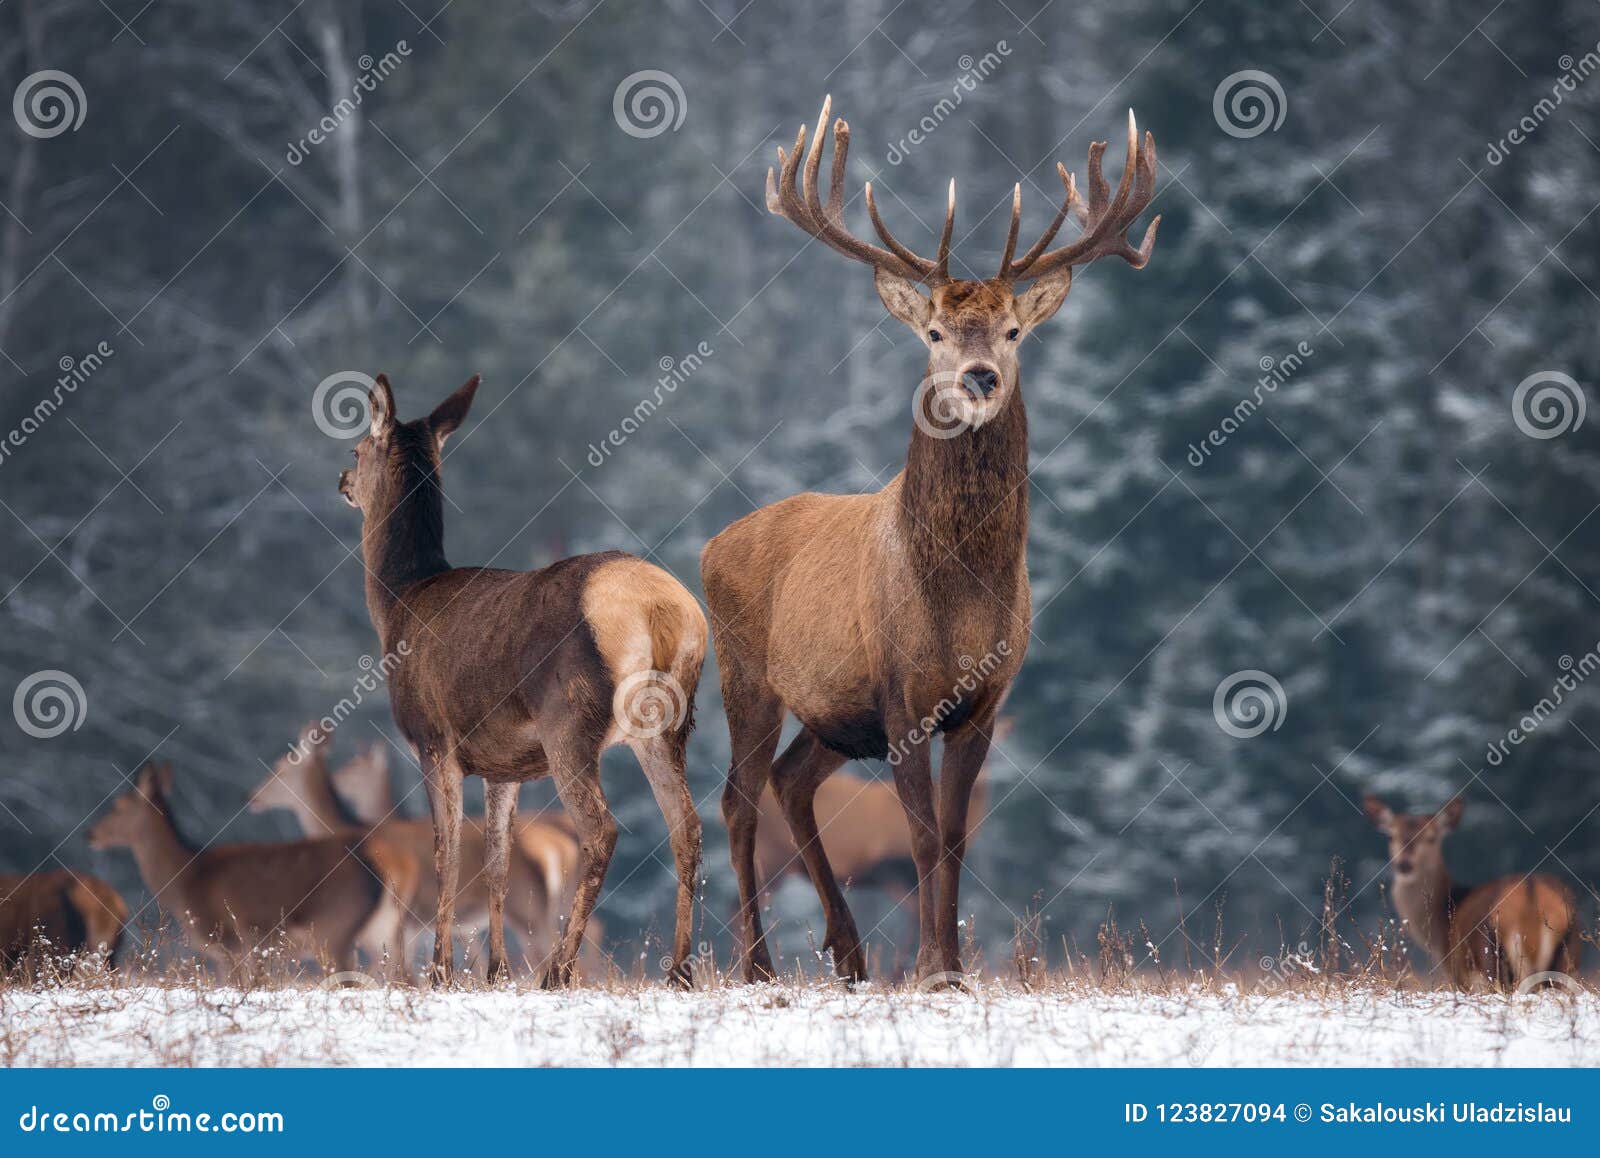 two deer cervus elaphus against the background of the winter forest and the silhouettes of the herd: stag with beautiful horn